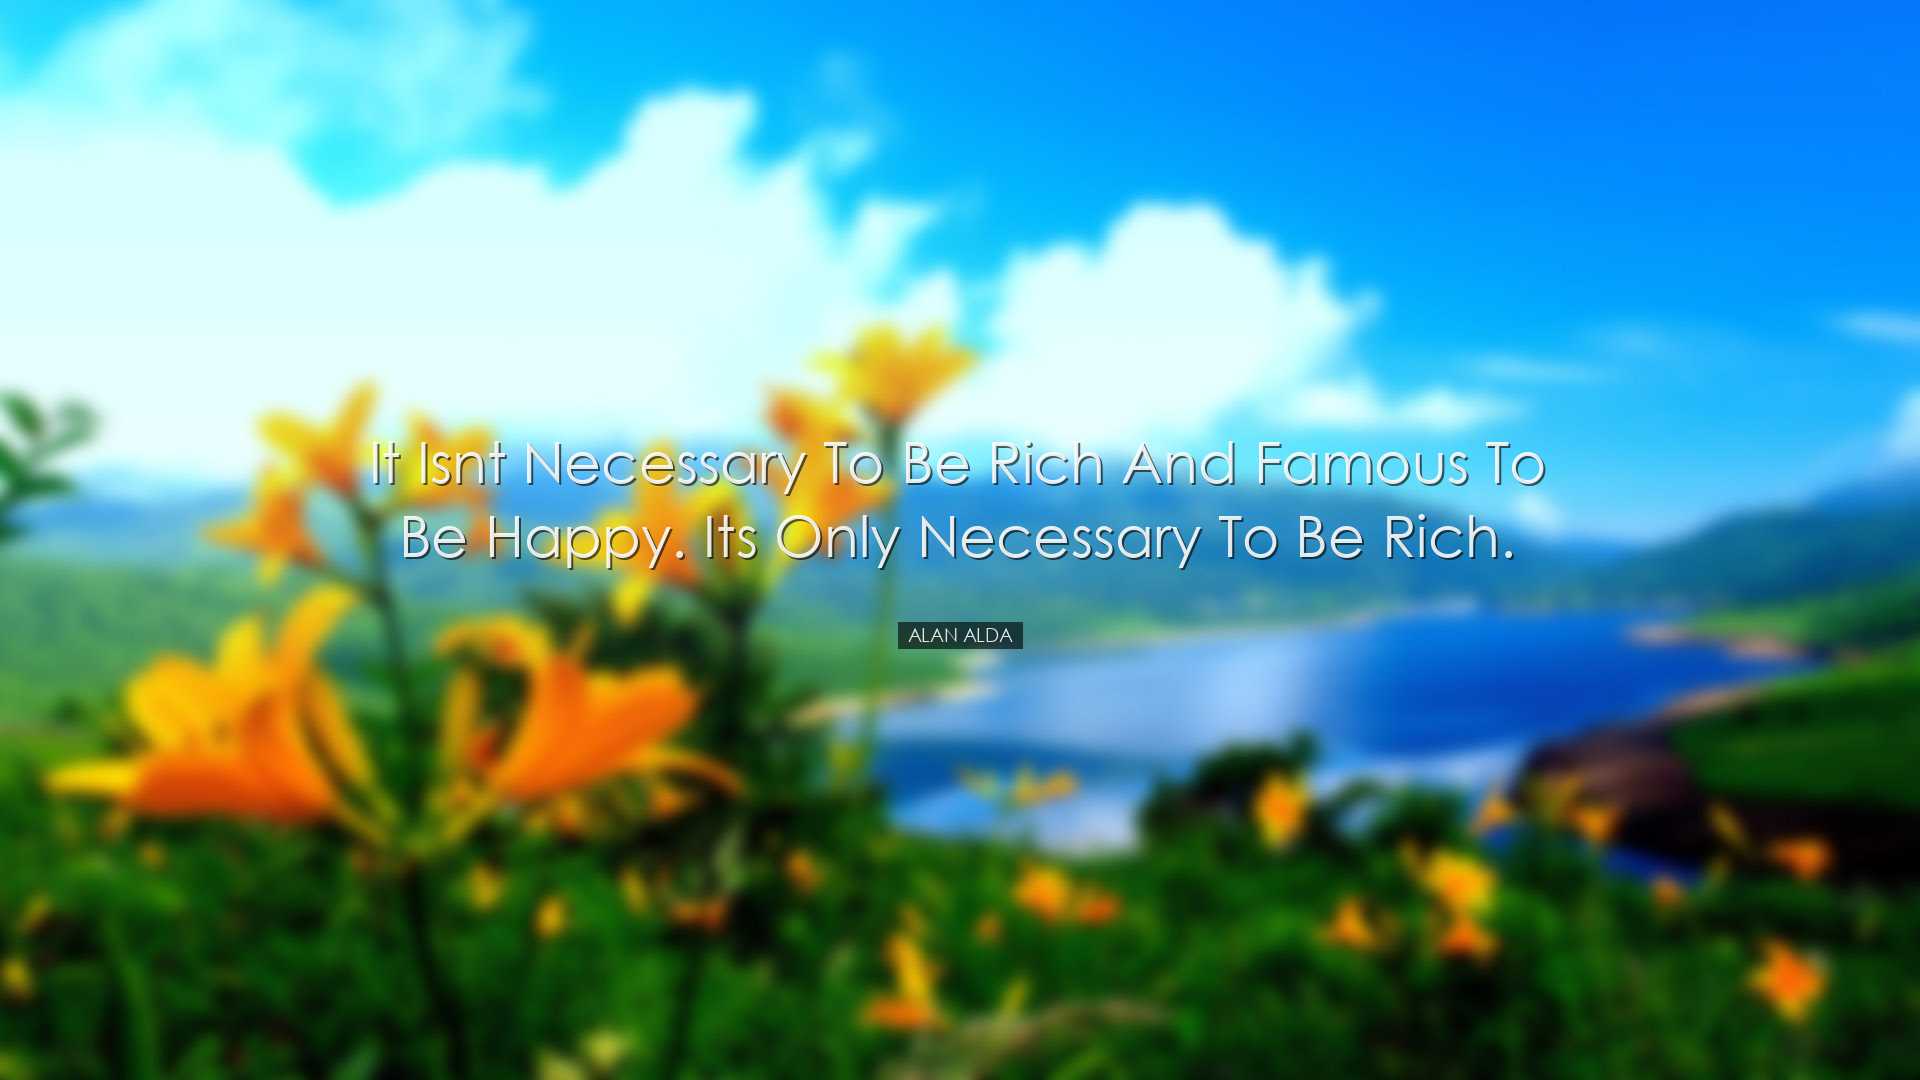 It isnt necessary to be rich and famous to be happy. Its only nece